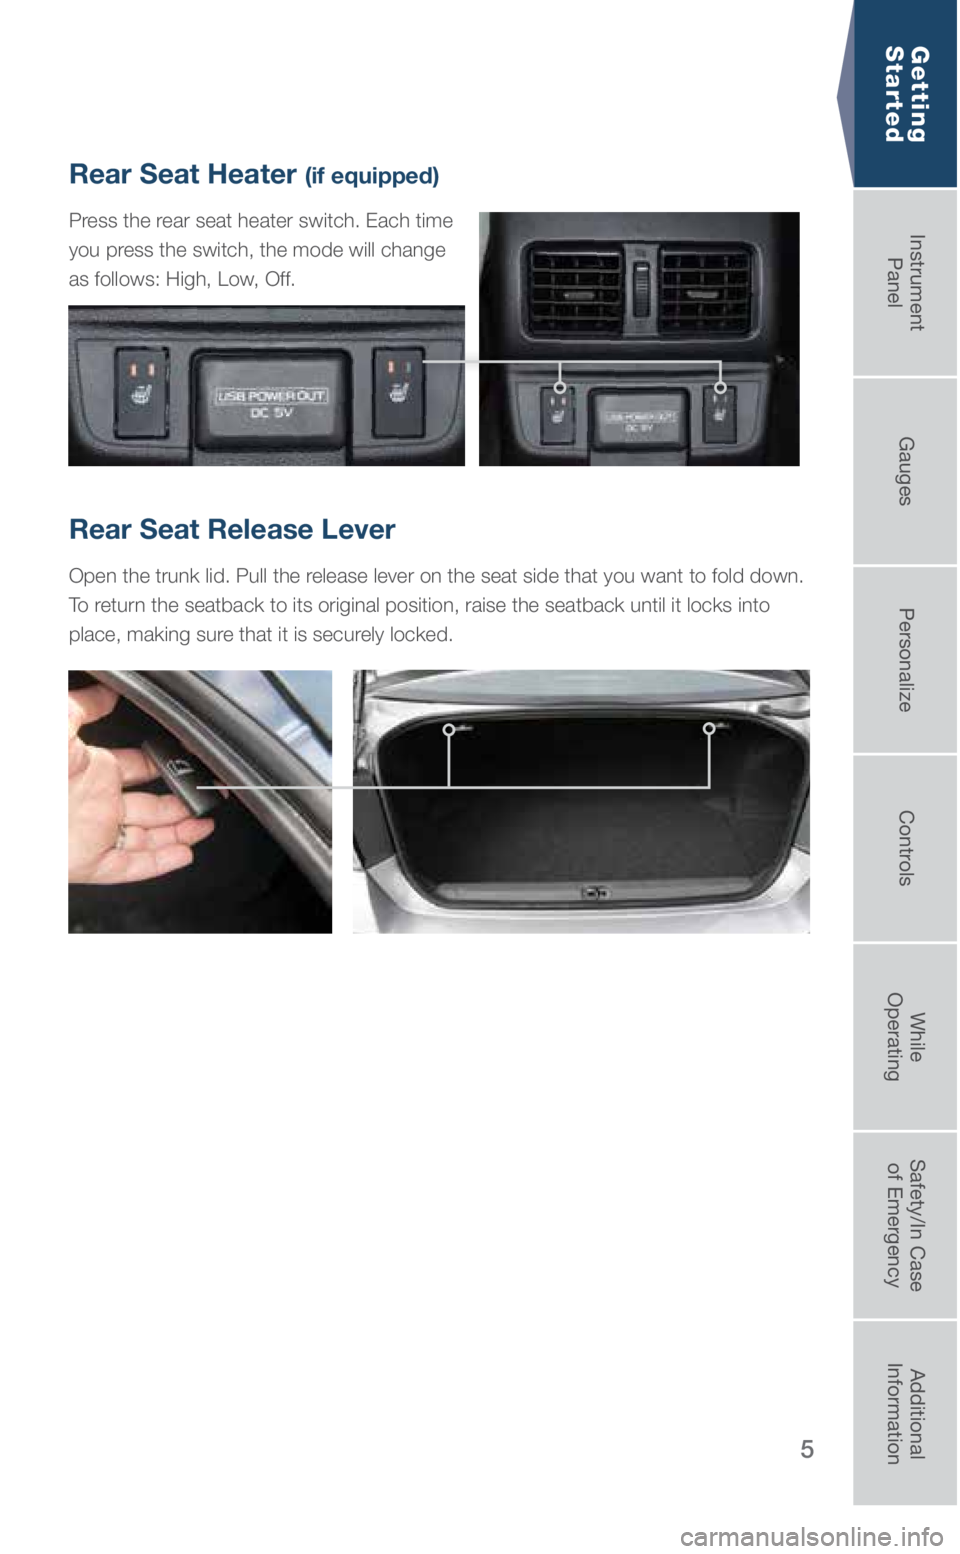 SUBARU LEGACY 2019  Quick Guide 5
Rear Seat Release Lever
Open the trunk lid. Pull the release lever on the seat side that you want to fold down. 
To return the seatback to its original position, raise the seatback until it loc\
ks 